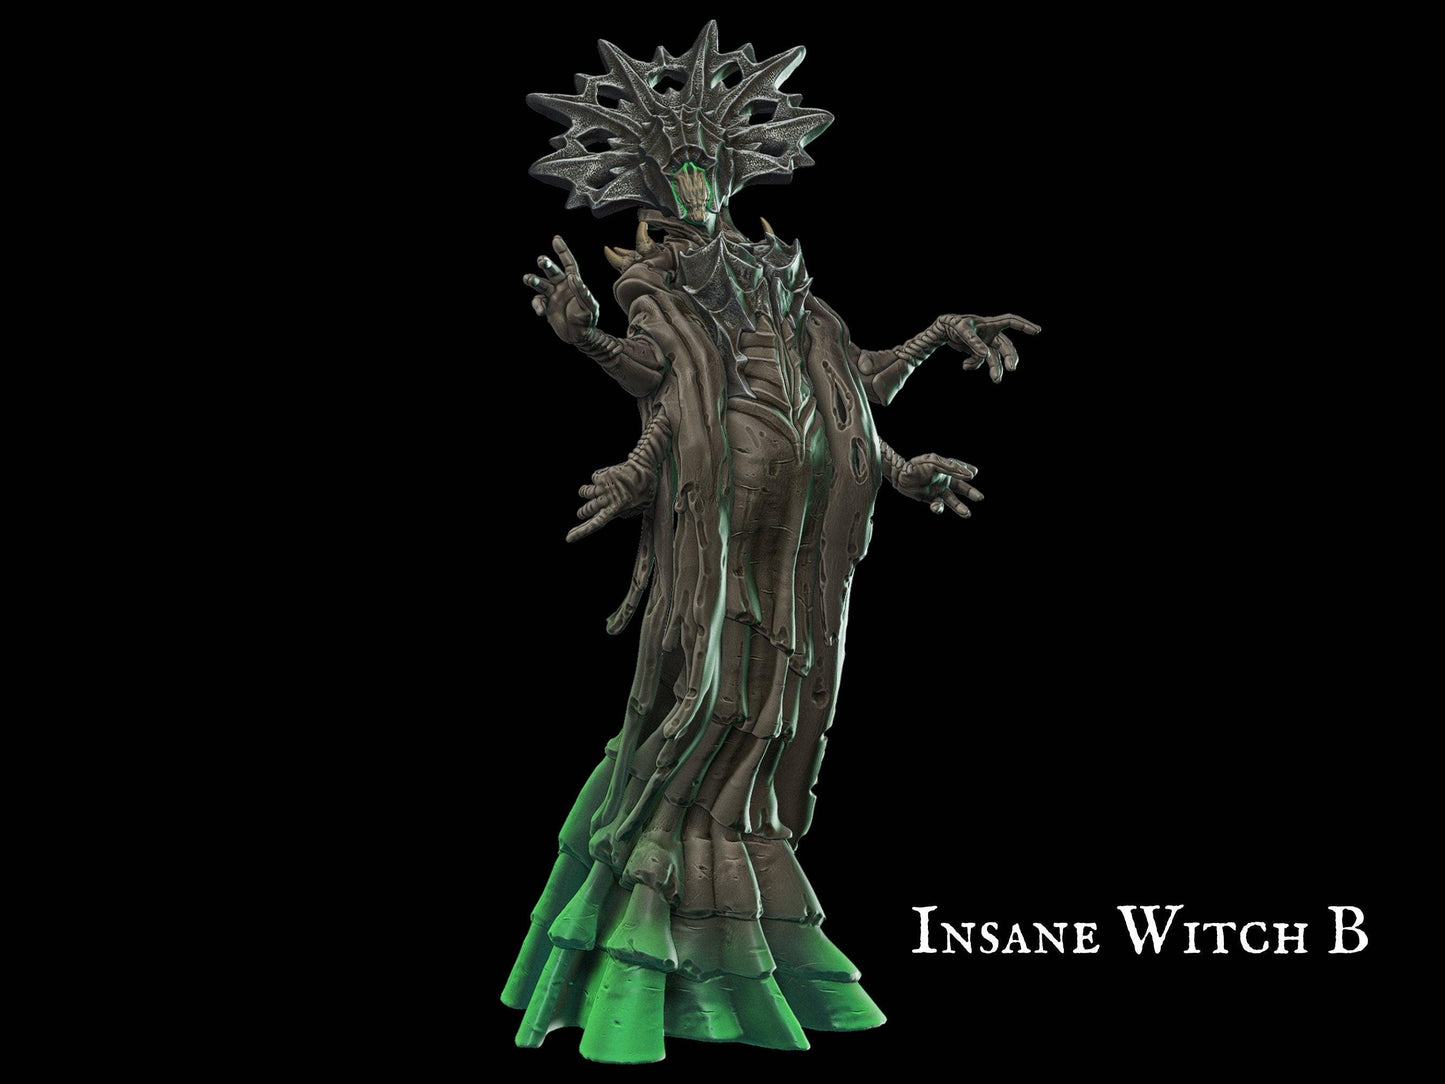 Insane Witch Miniature 28mm scale Tabletop gaming DnD Miniature Dungeons and Dragons dnd 5e dungeon master gift sorcerer miniature - Plague Miniatures shop for DnD Miniatures